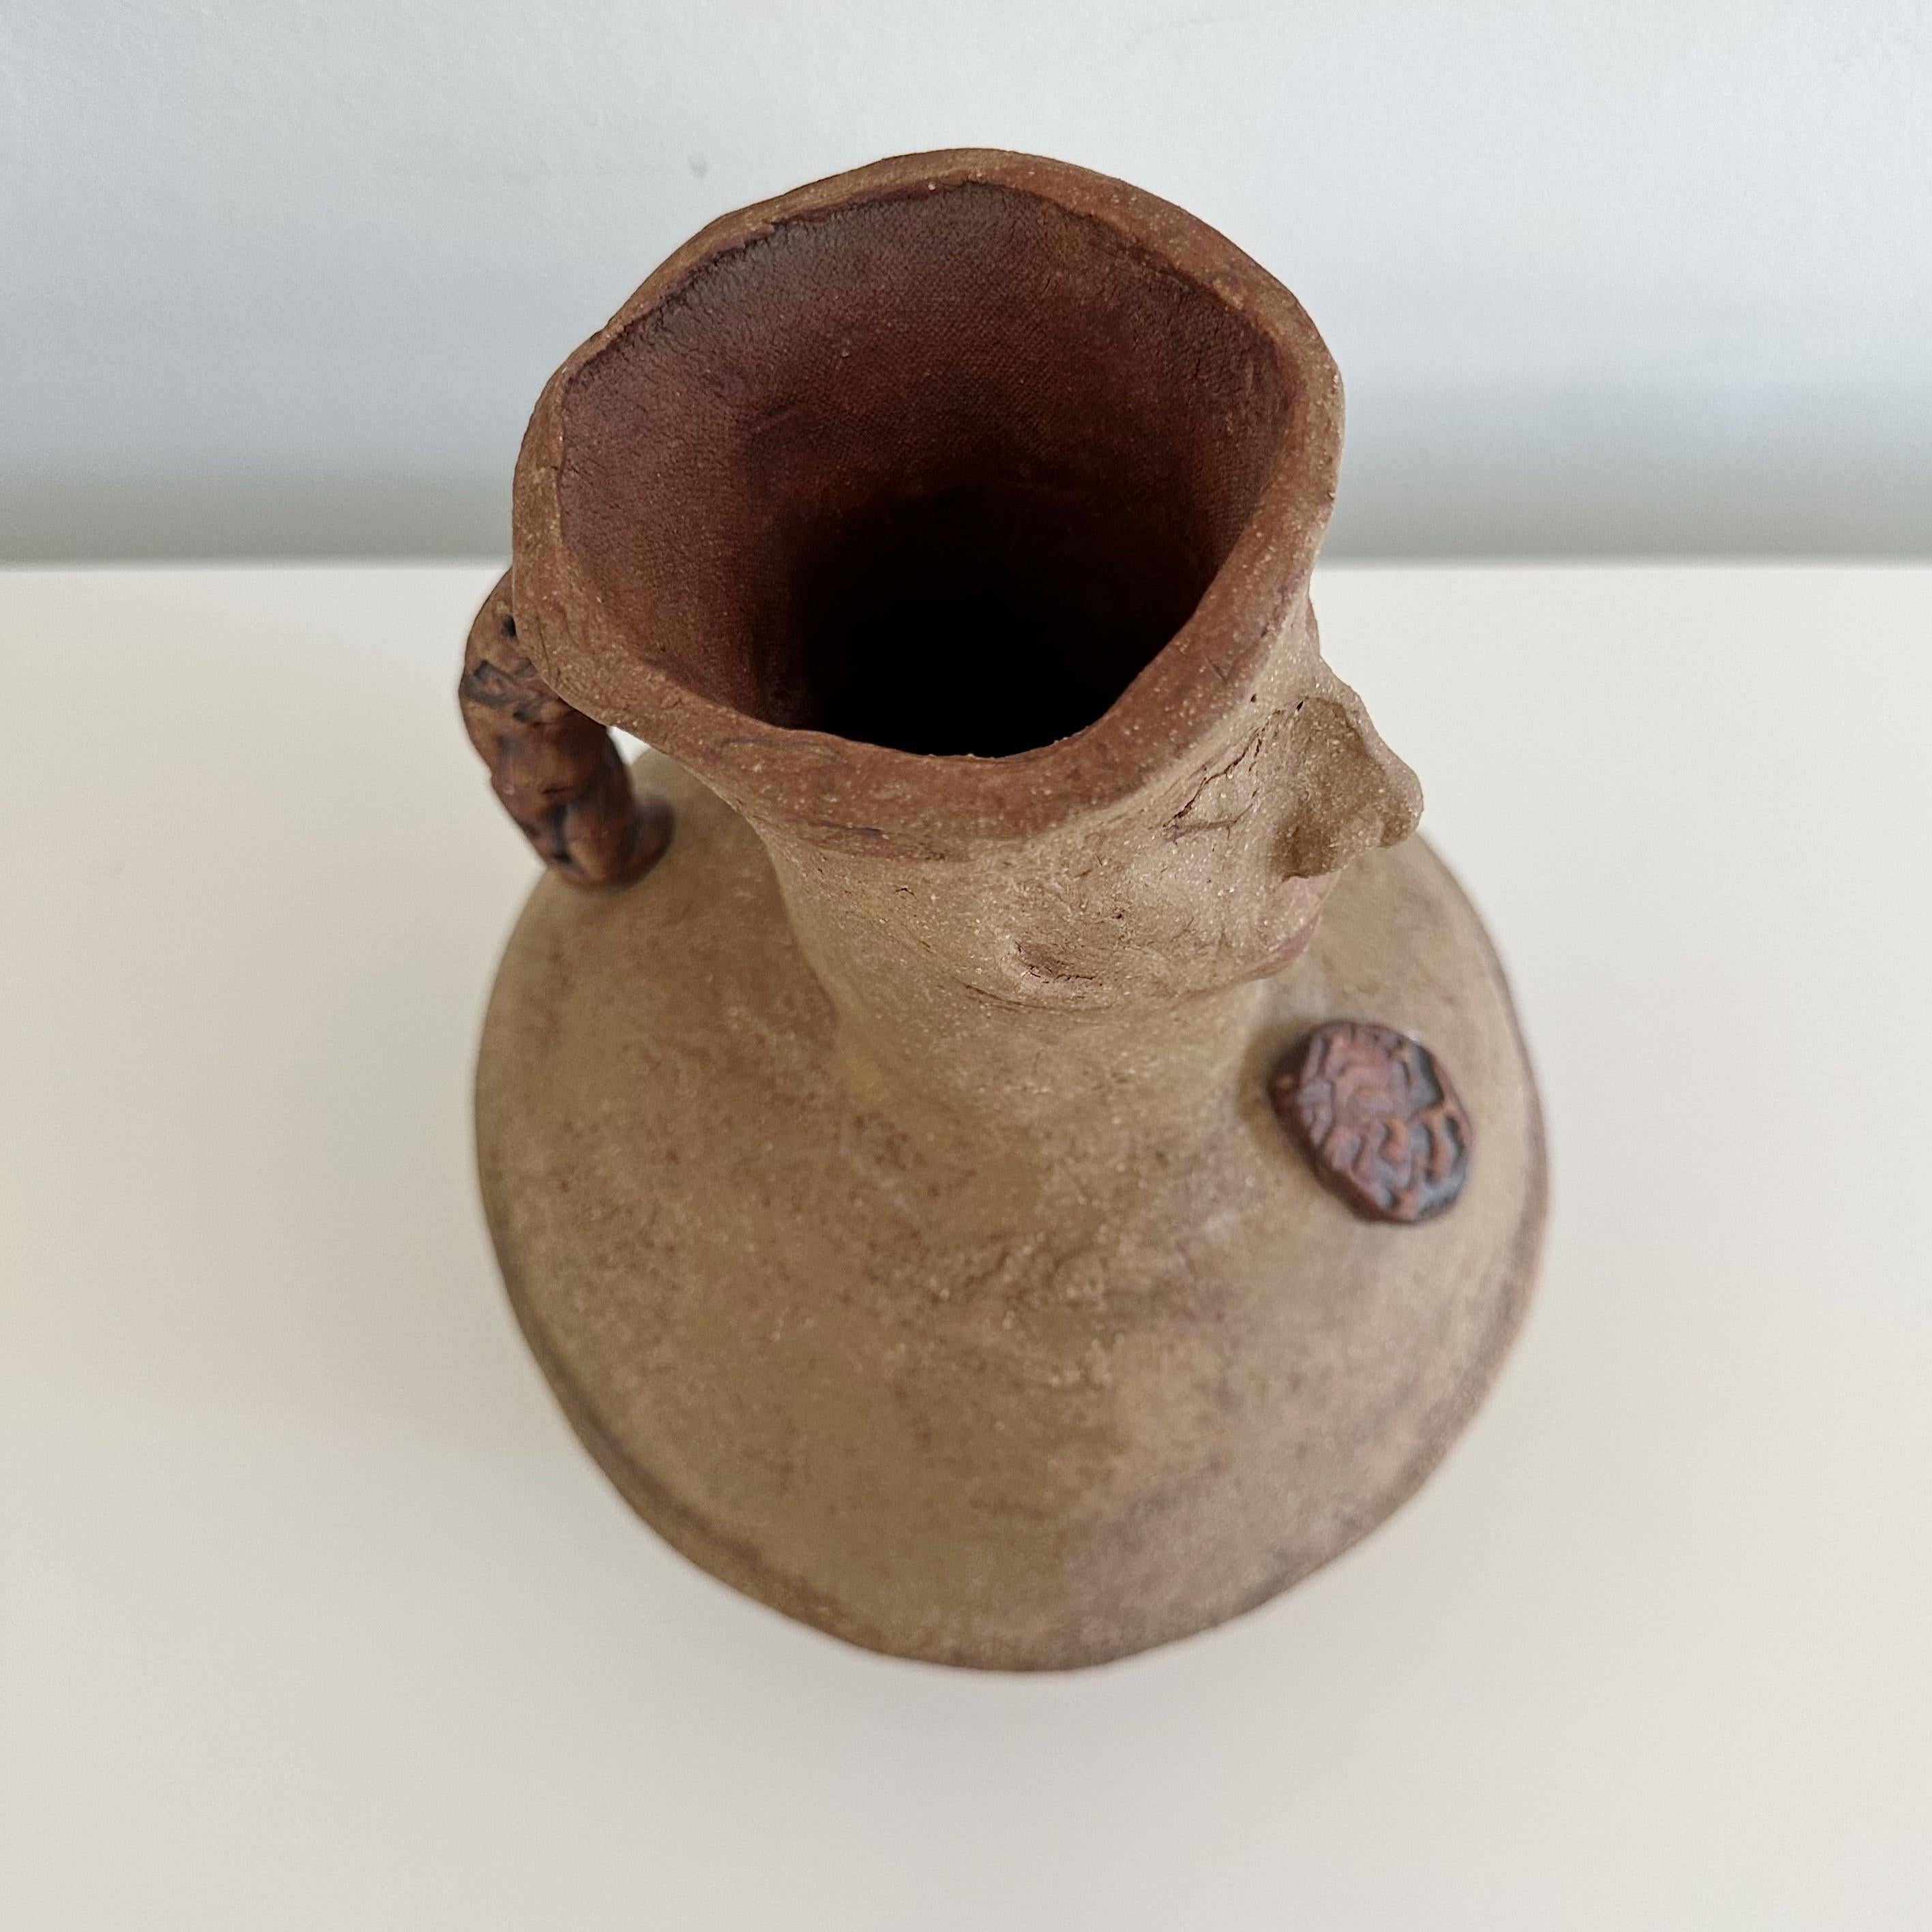 Presenting a unique studio pottery figural handled jug, pitcher or could also be used as a vase. Created by the renowned sculptor Ruth Joffa. This particular signed piece, comes with a distinguished provenance, having been acquired directly from the